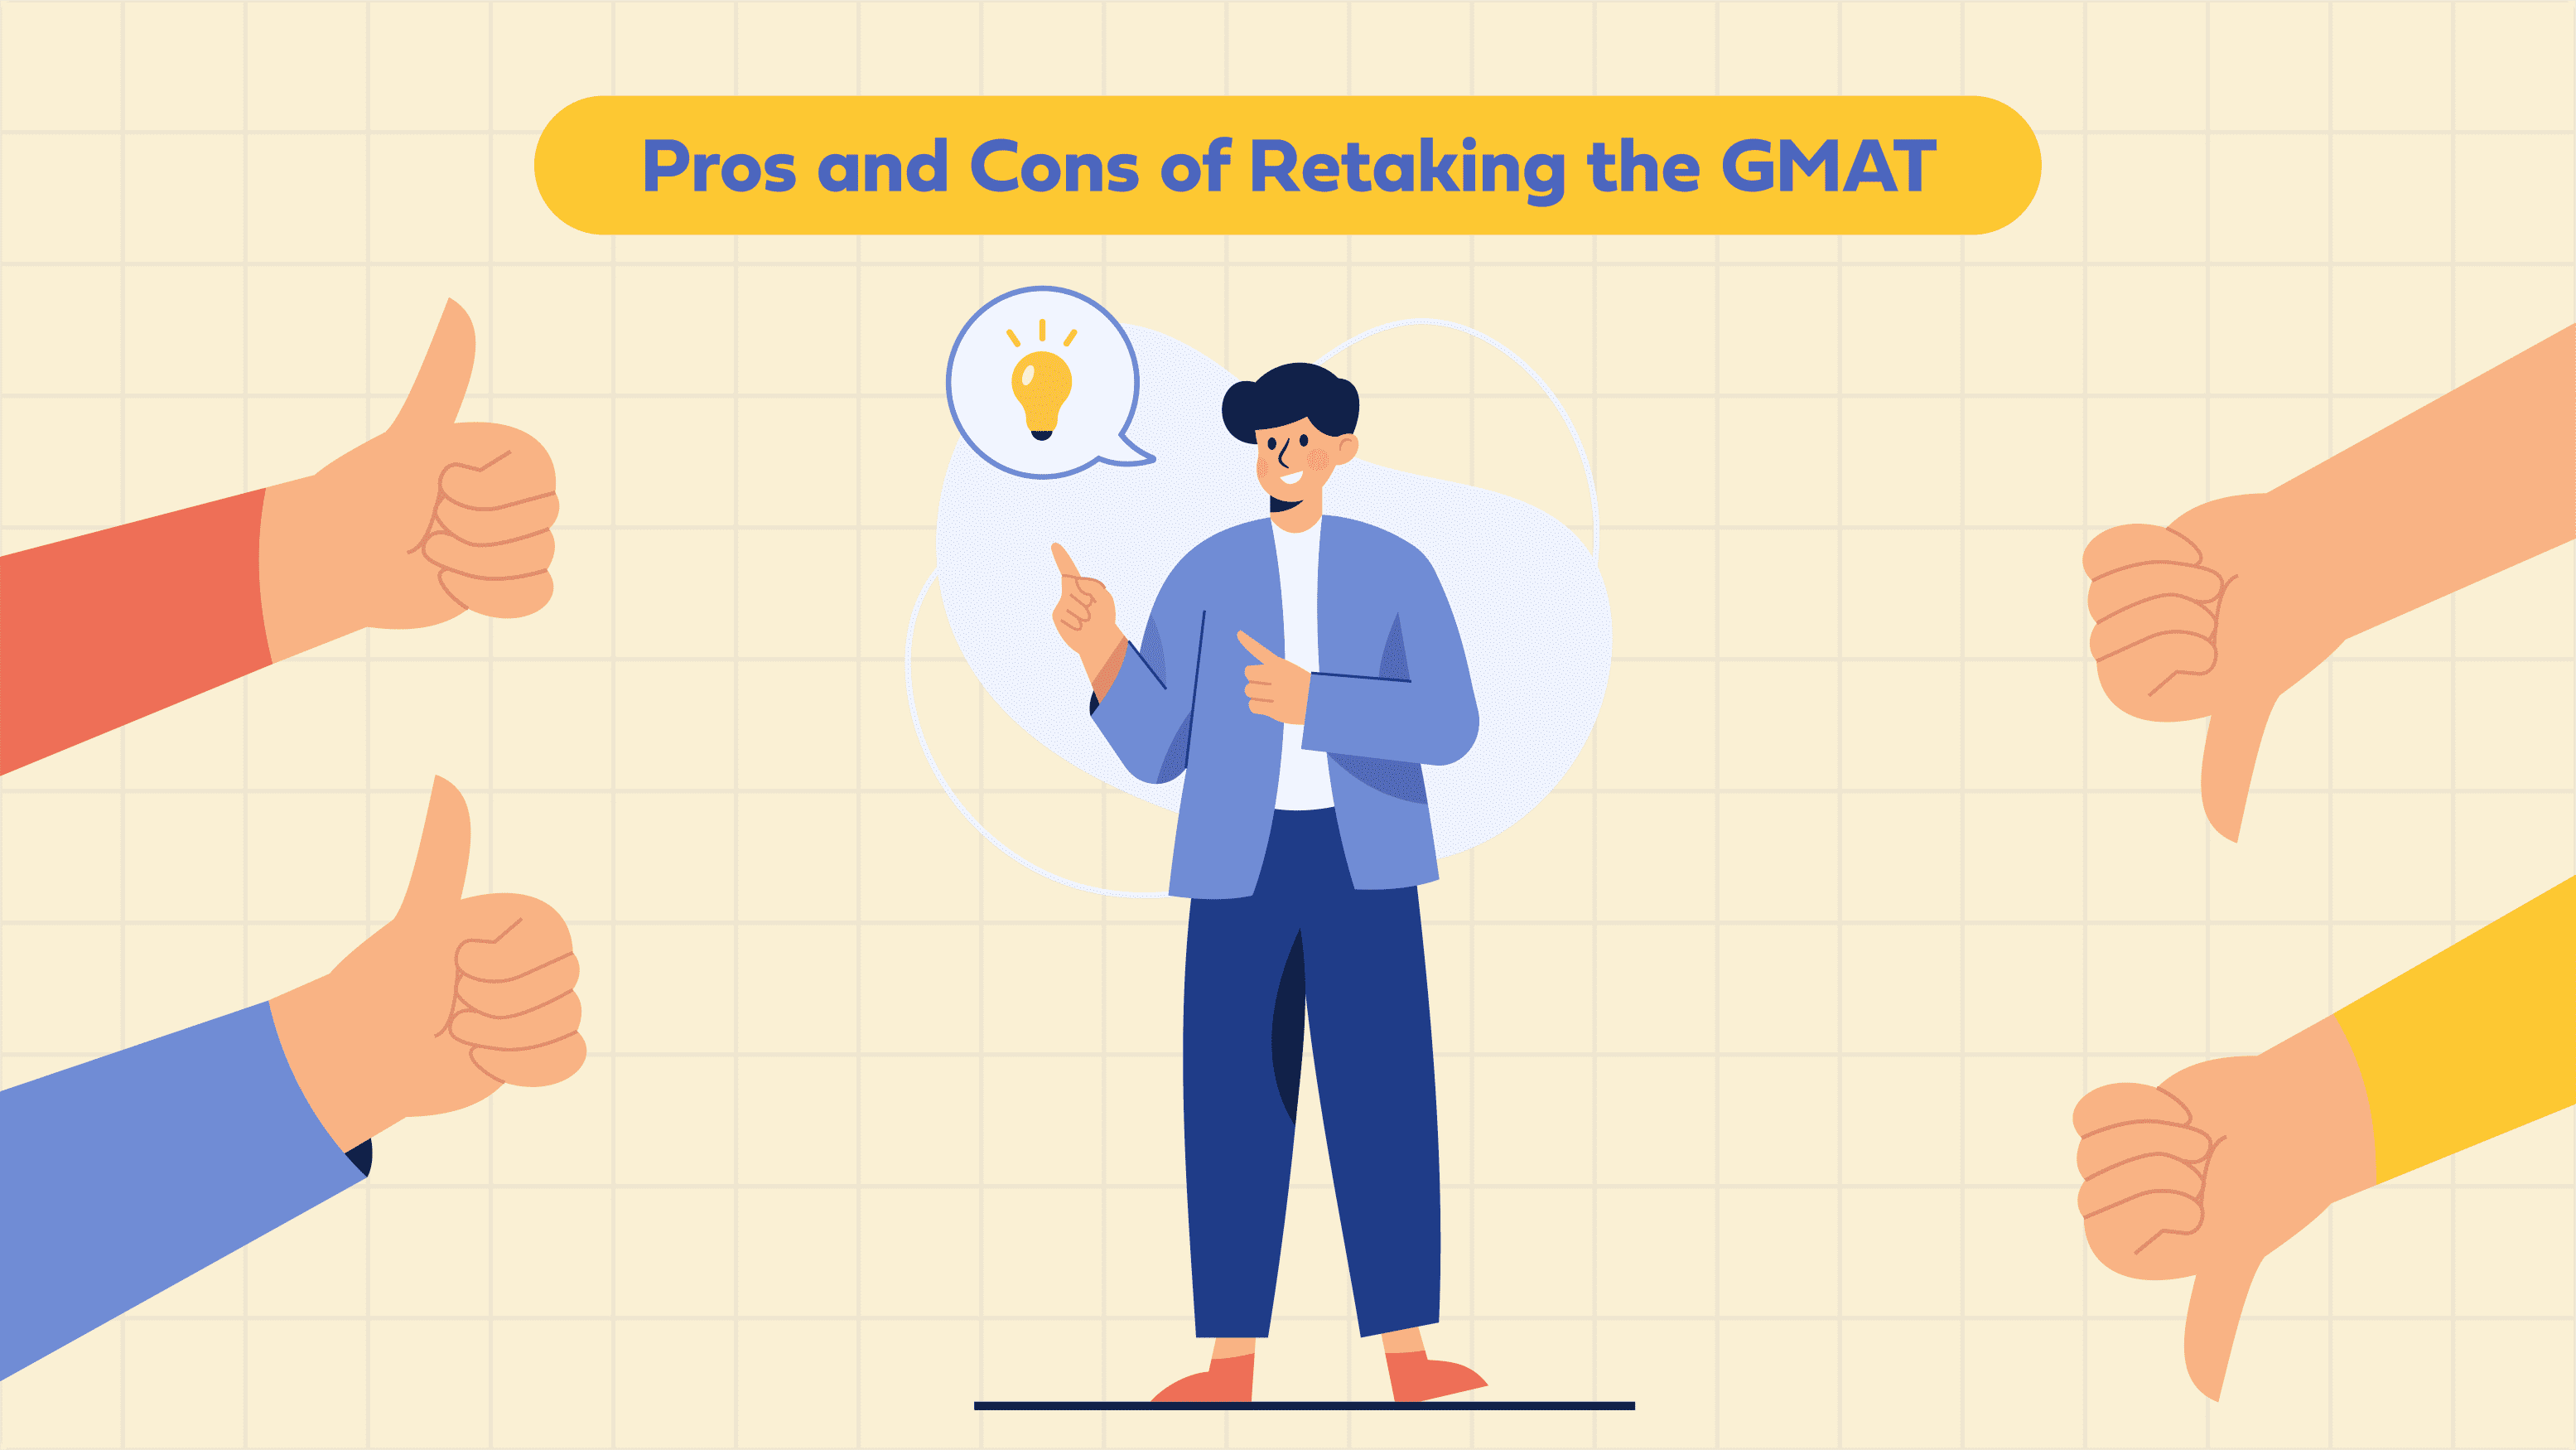 Pros and Cons of Retaking the GMAT